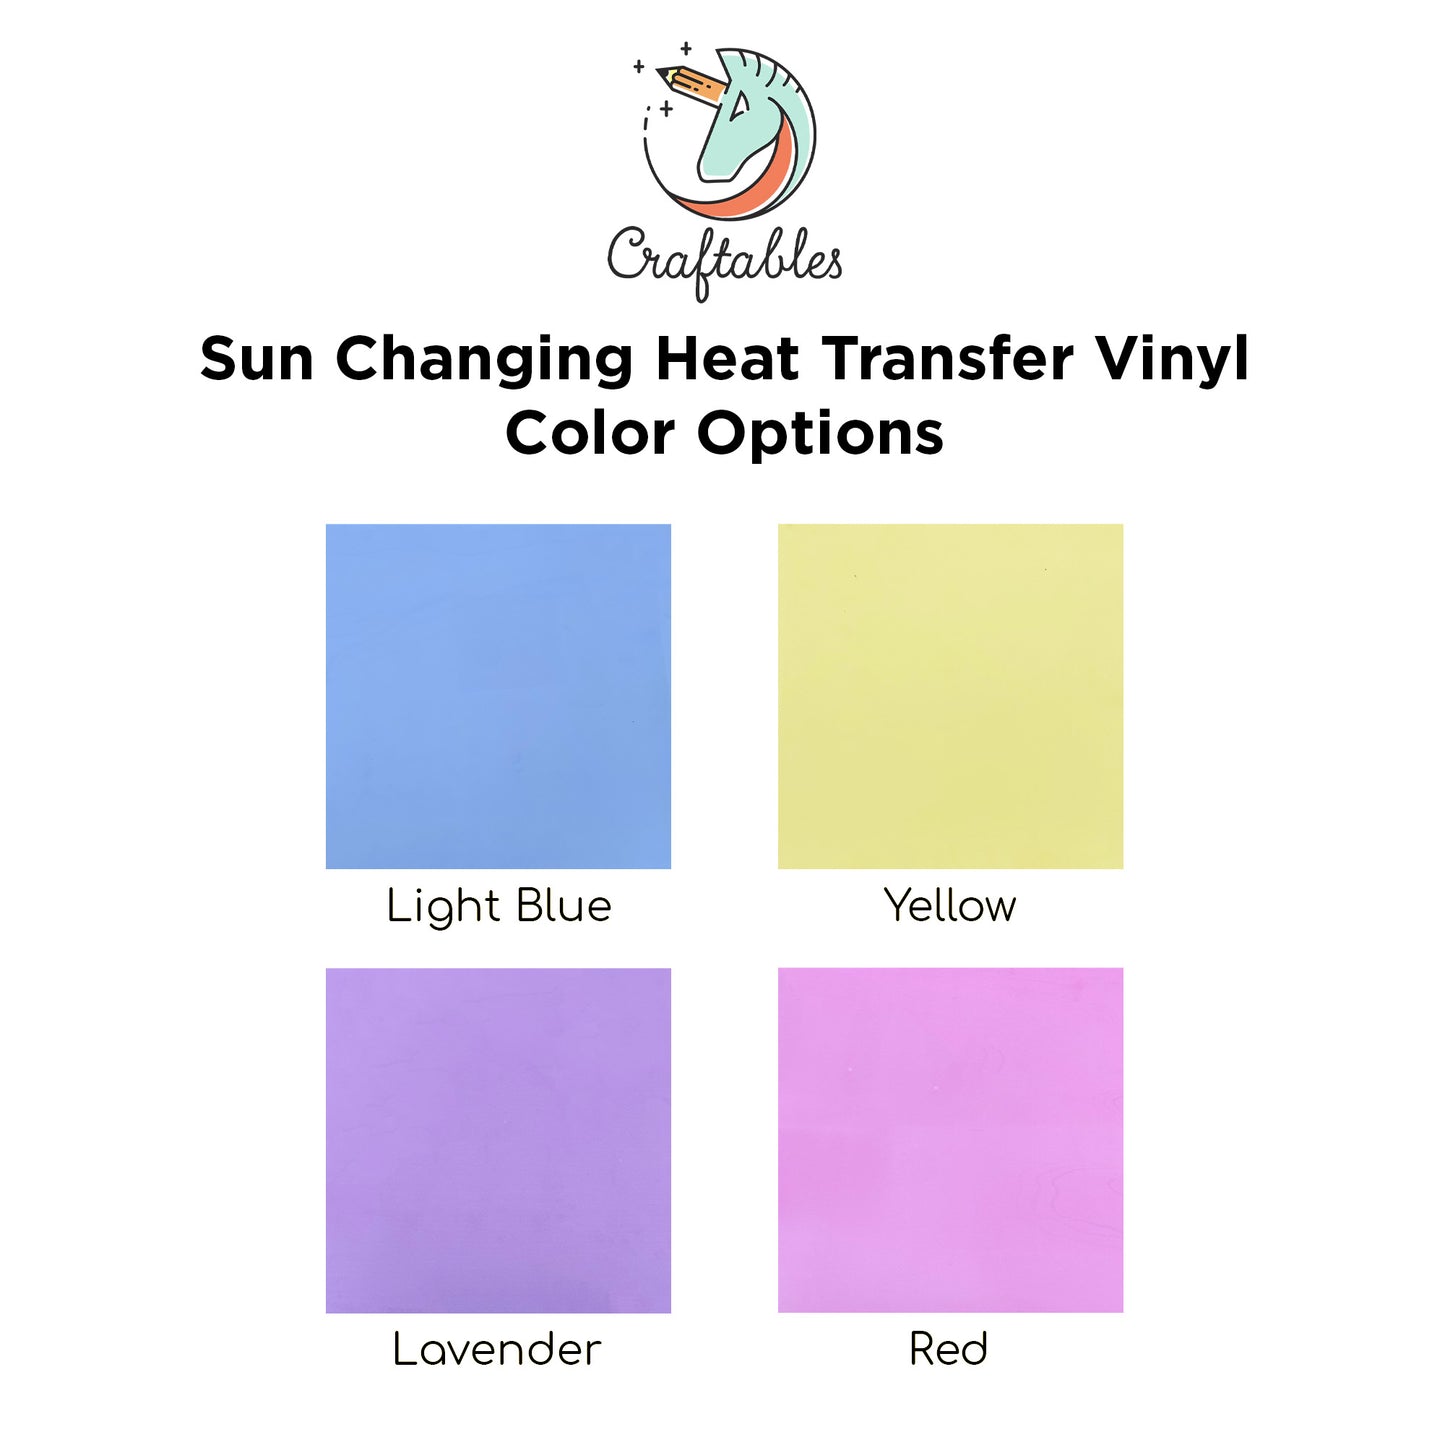 Red Light Changing Heat Transfer Vinyl Rolls By Craftables